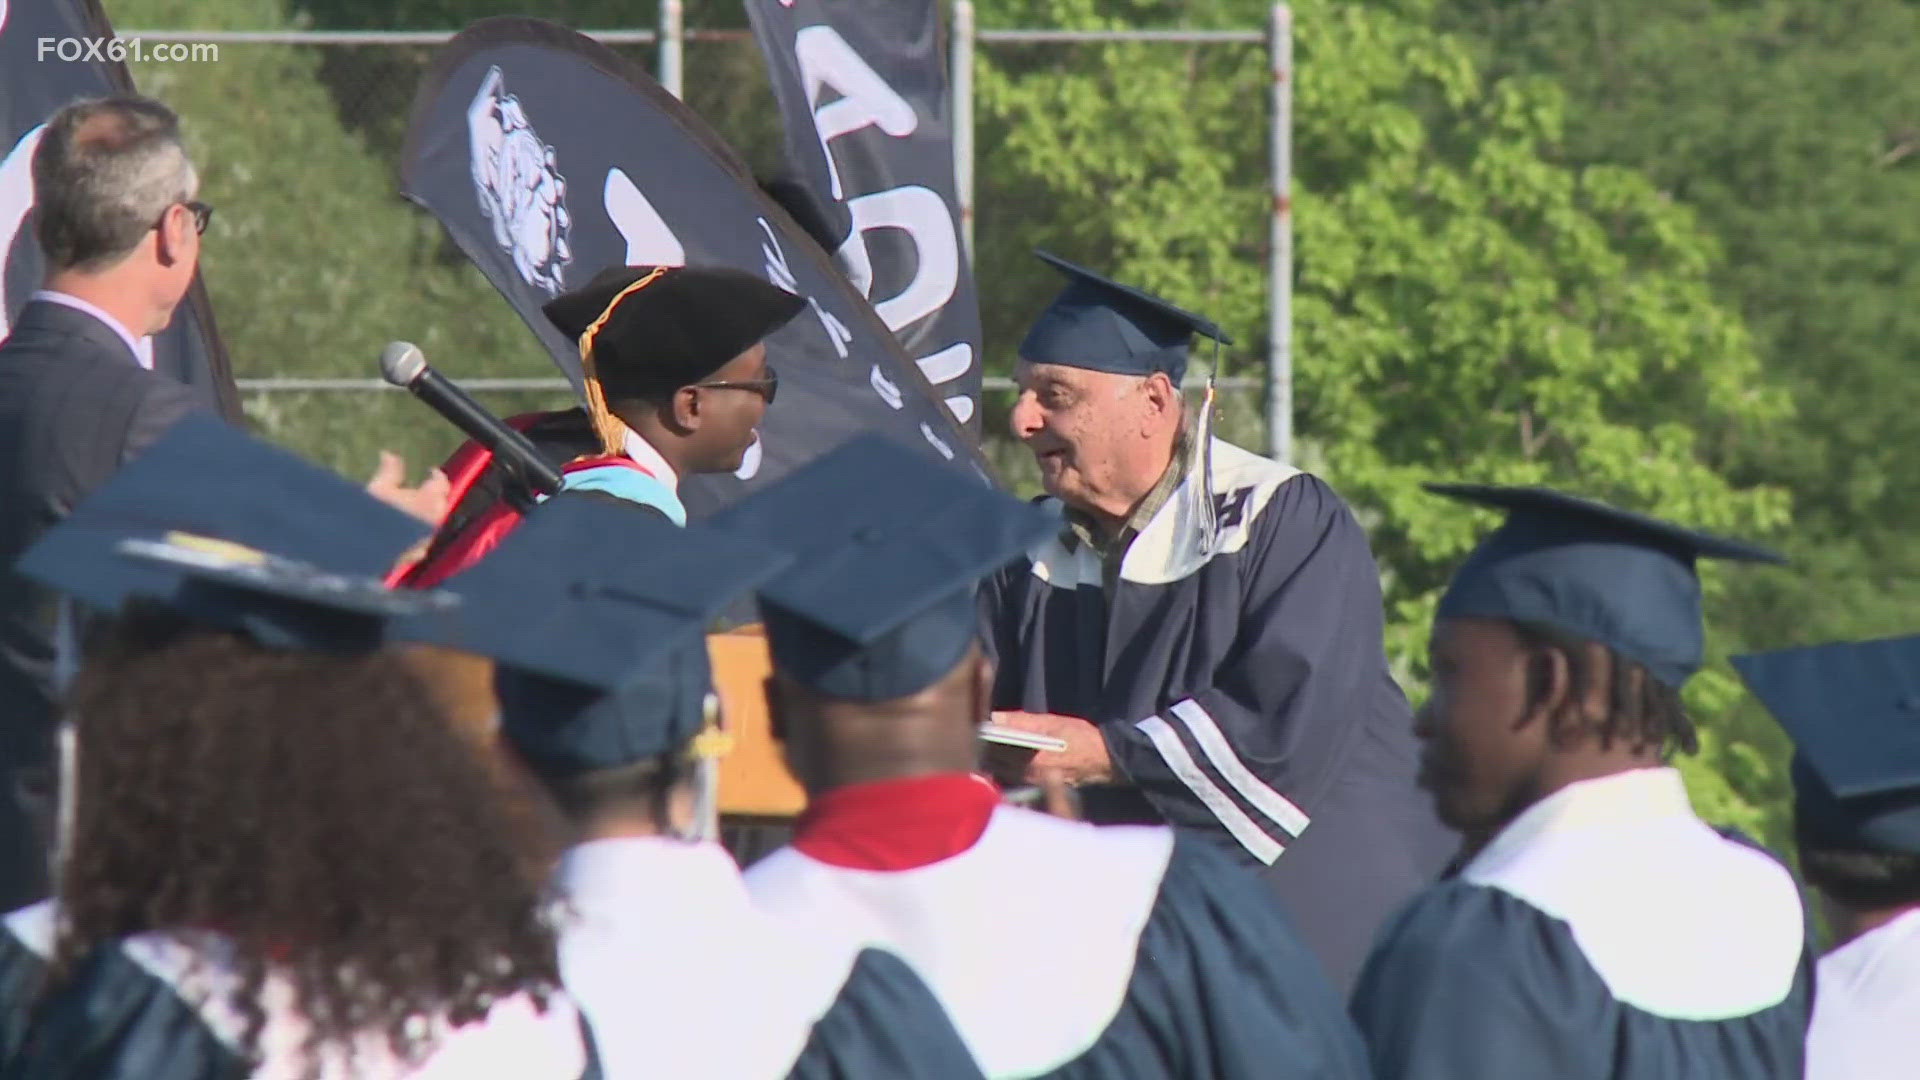 In a sea of blue and white regalia, one graduate stuck out. Paul Panagrosso is a WWII Army veteran.